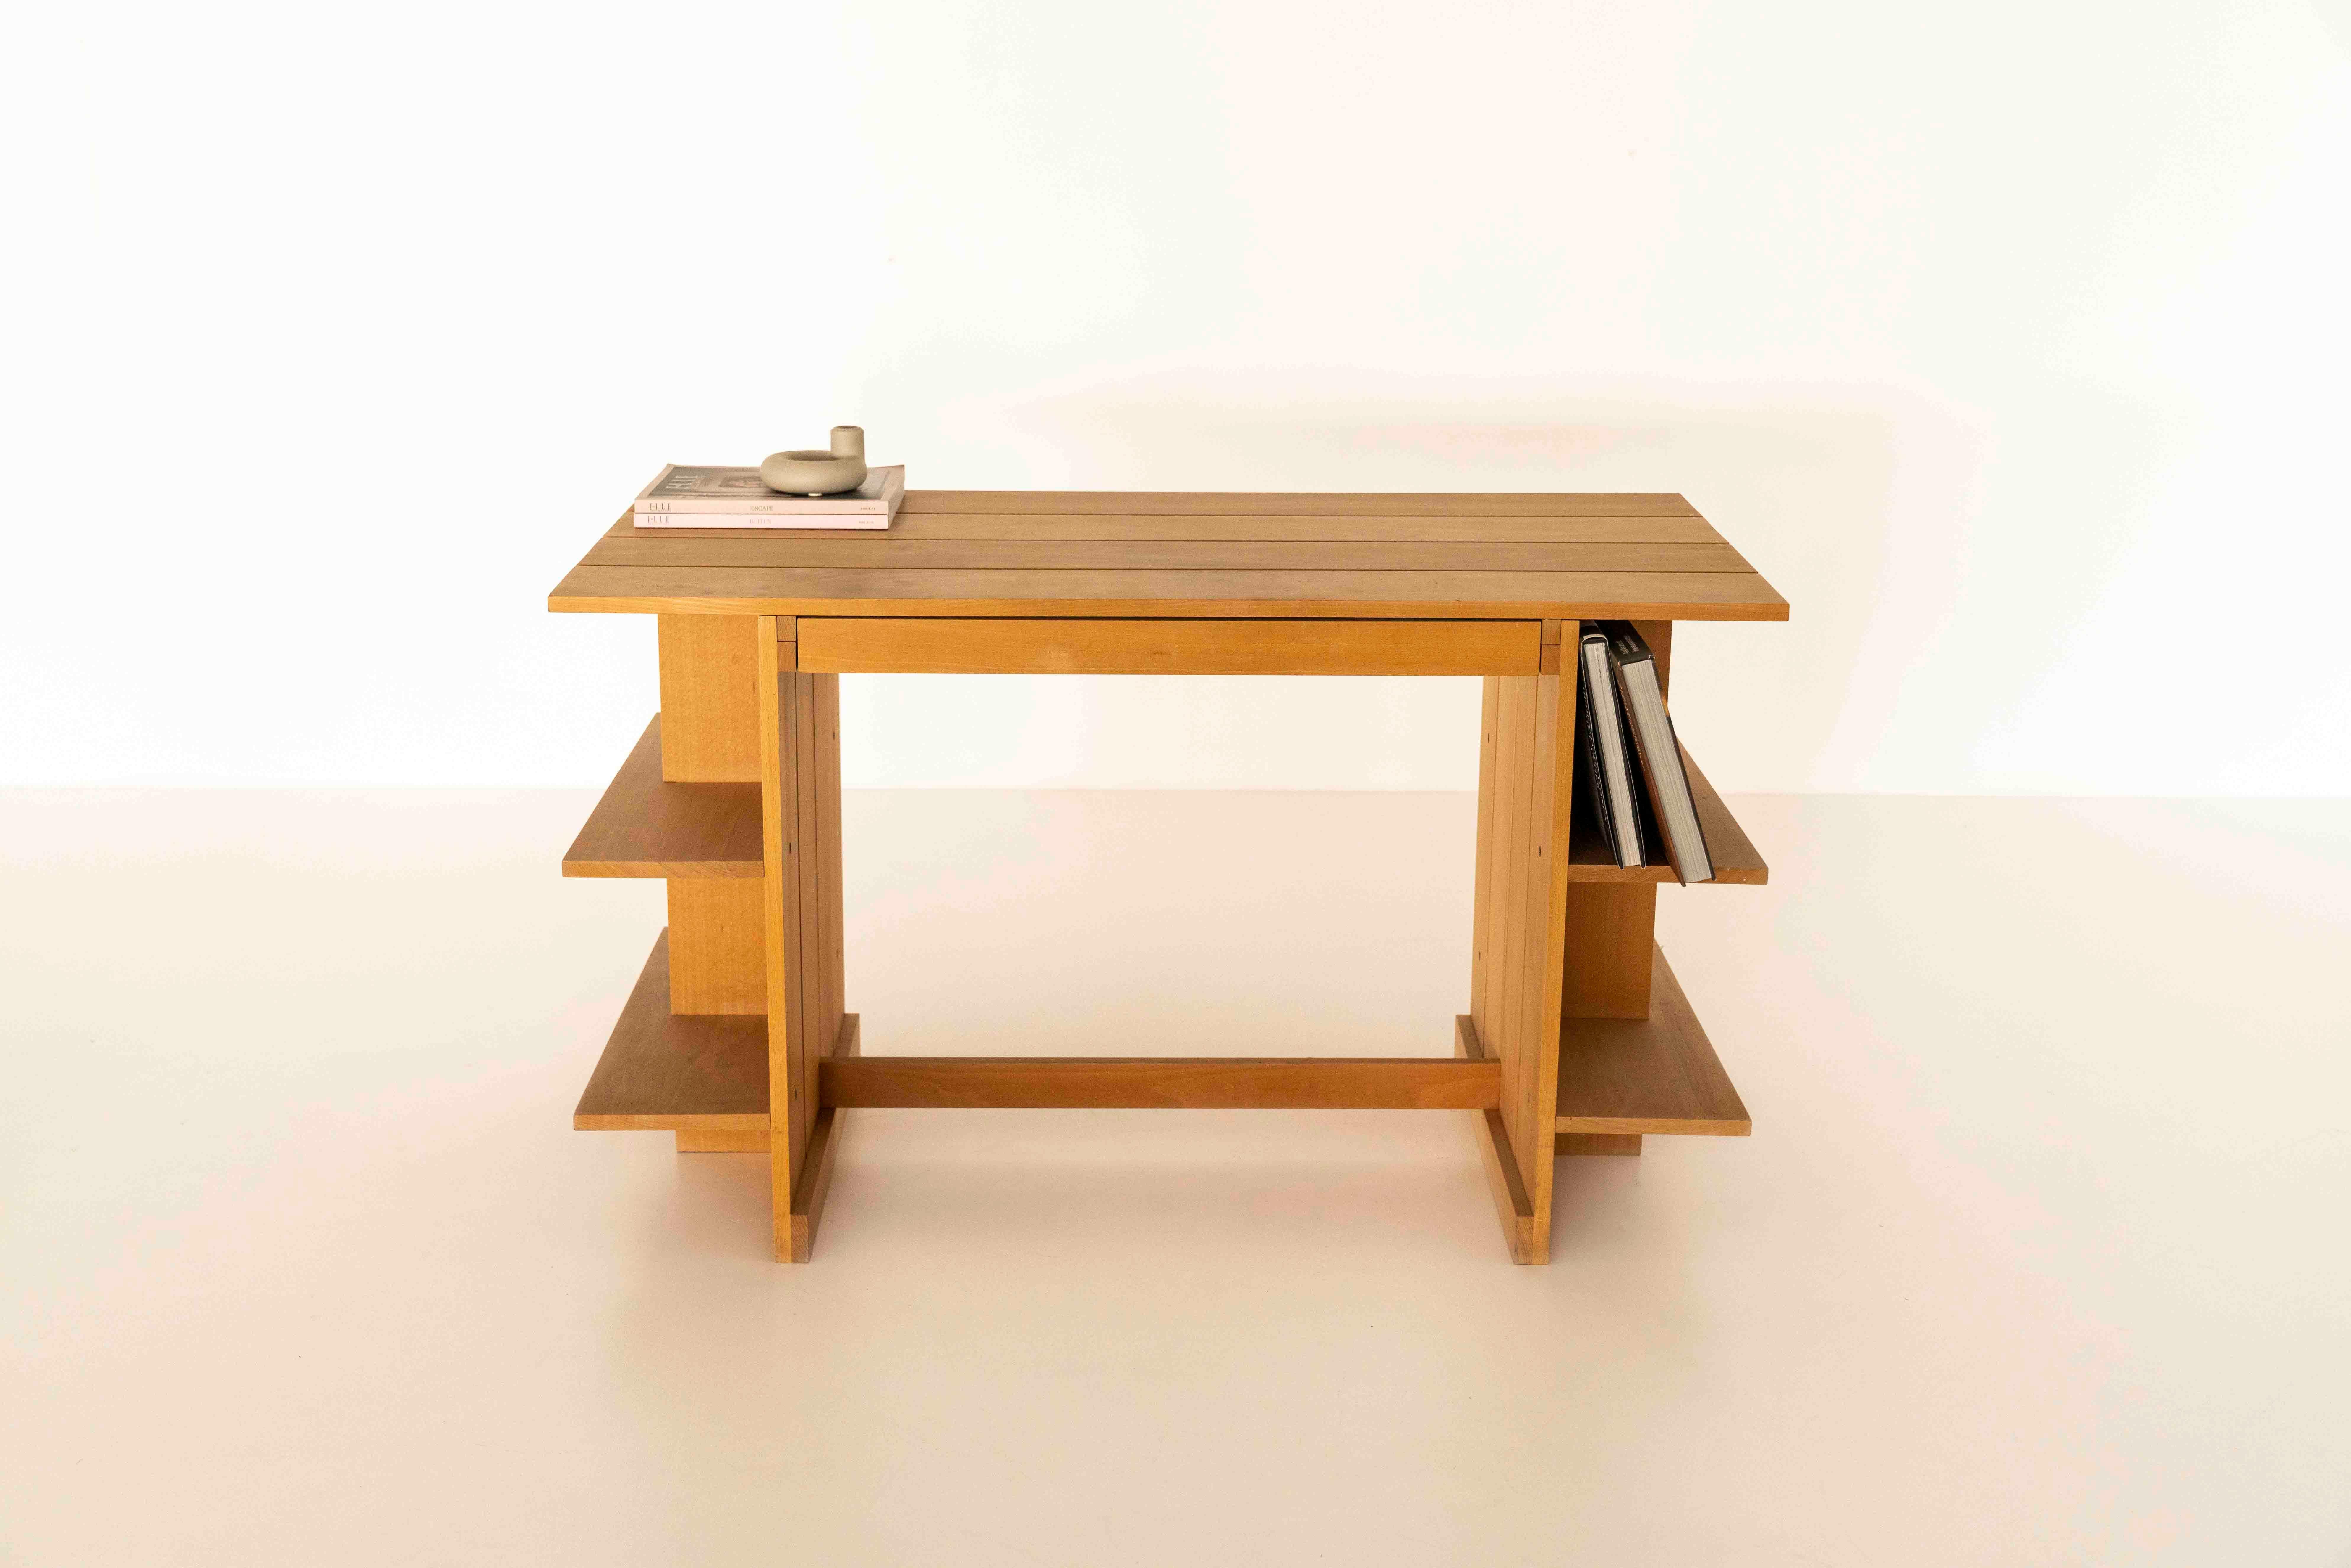 Dutch Crate Desk for Cassina by Gerrit Rietveld, Designed in 1930s, the Netherlands